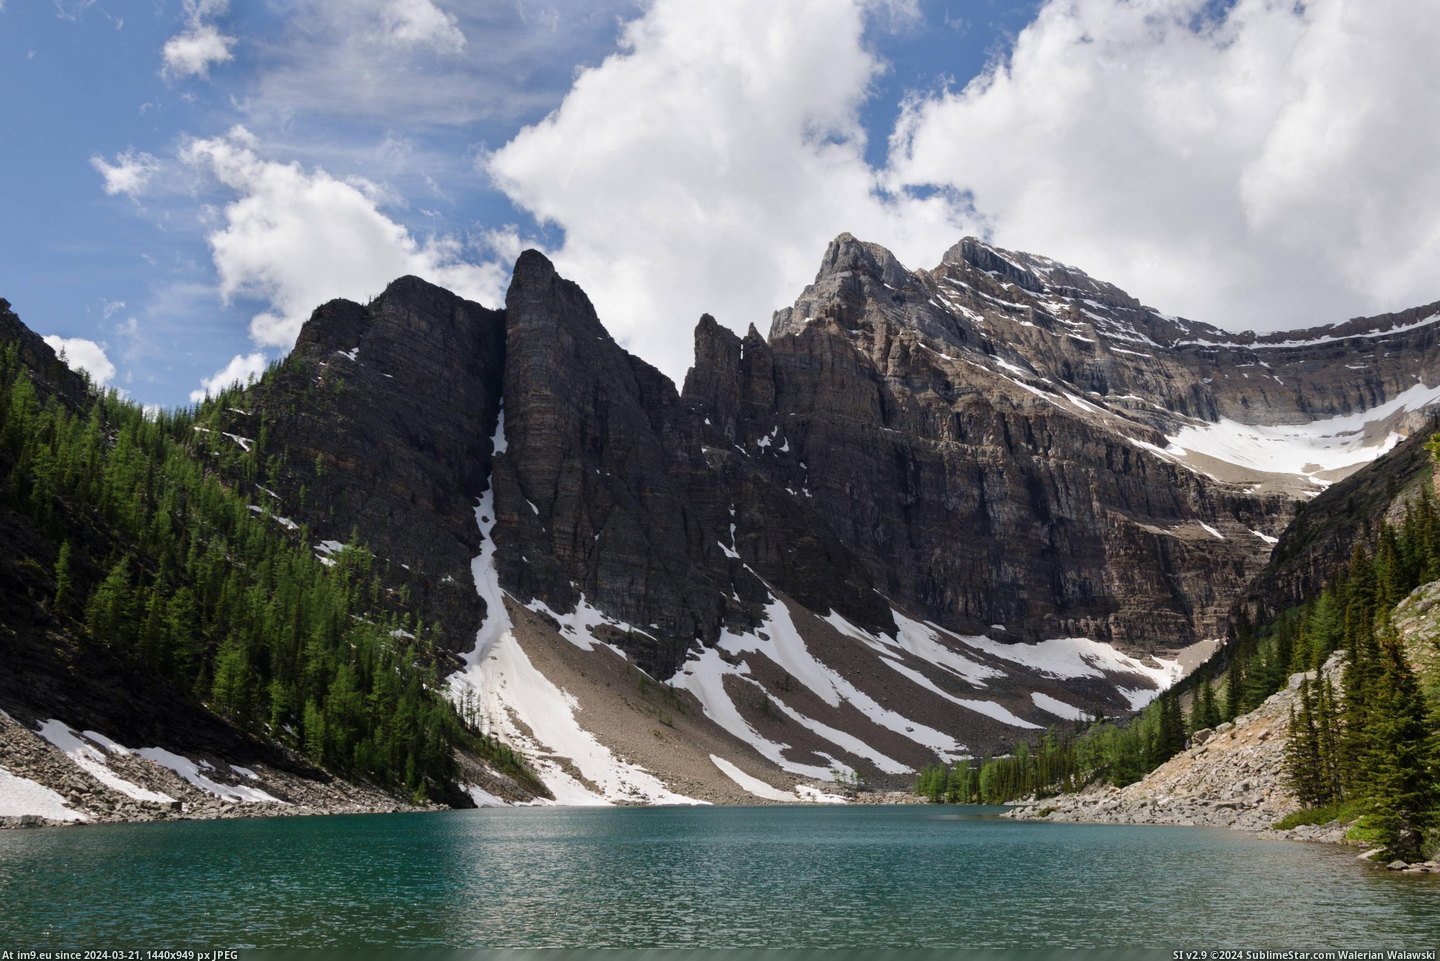 #Park #National #Alberta #Banff #Agnes #Lake #Canada [Earthporn] Lake Agnes in Banff National Park, Alberta, Canada [4220x2795] Pic. (Image of album My r/EARTHPORN favs))